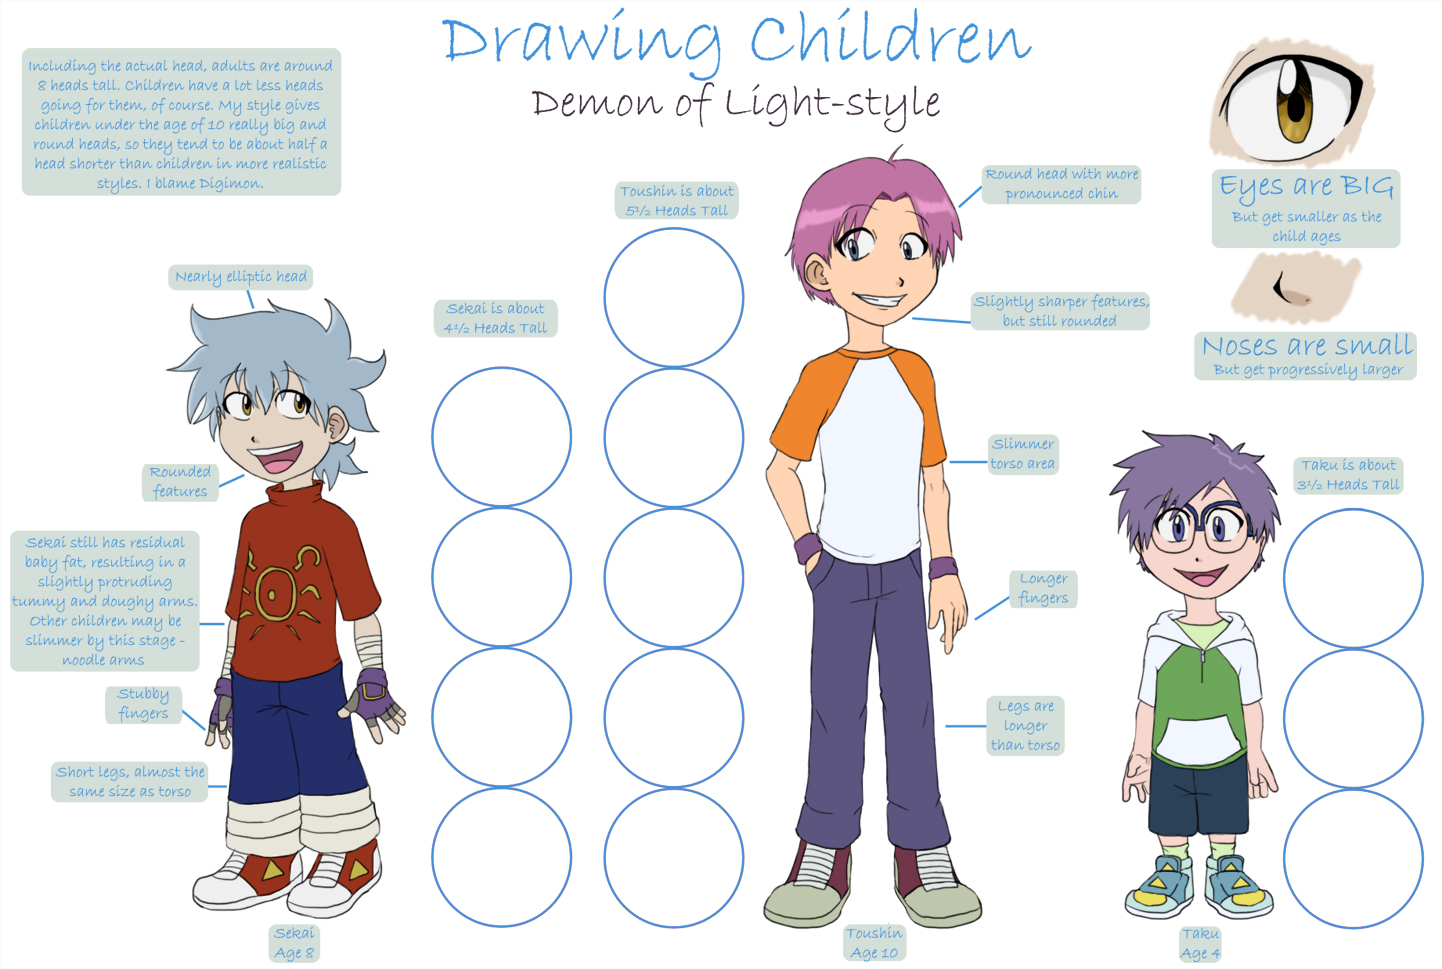 How to Get Children to Draw Big